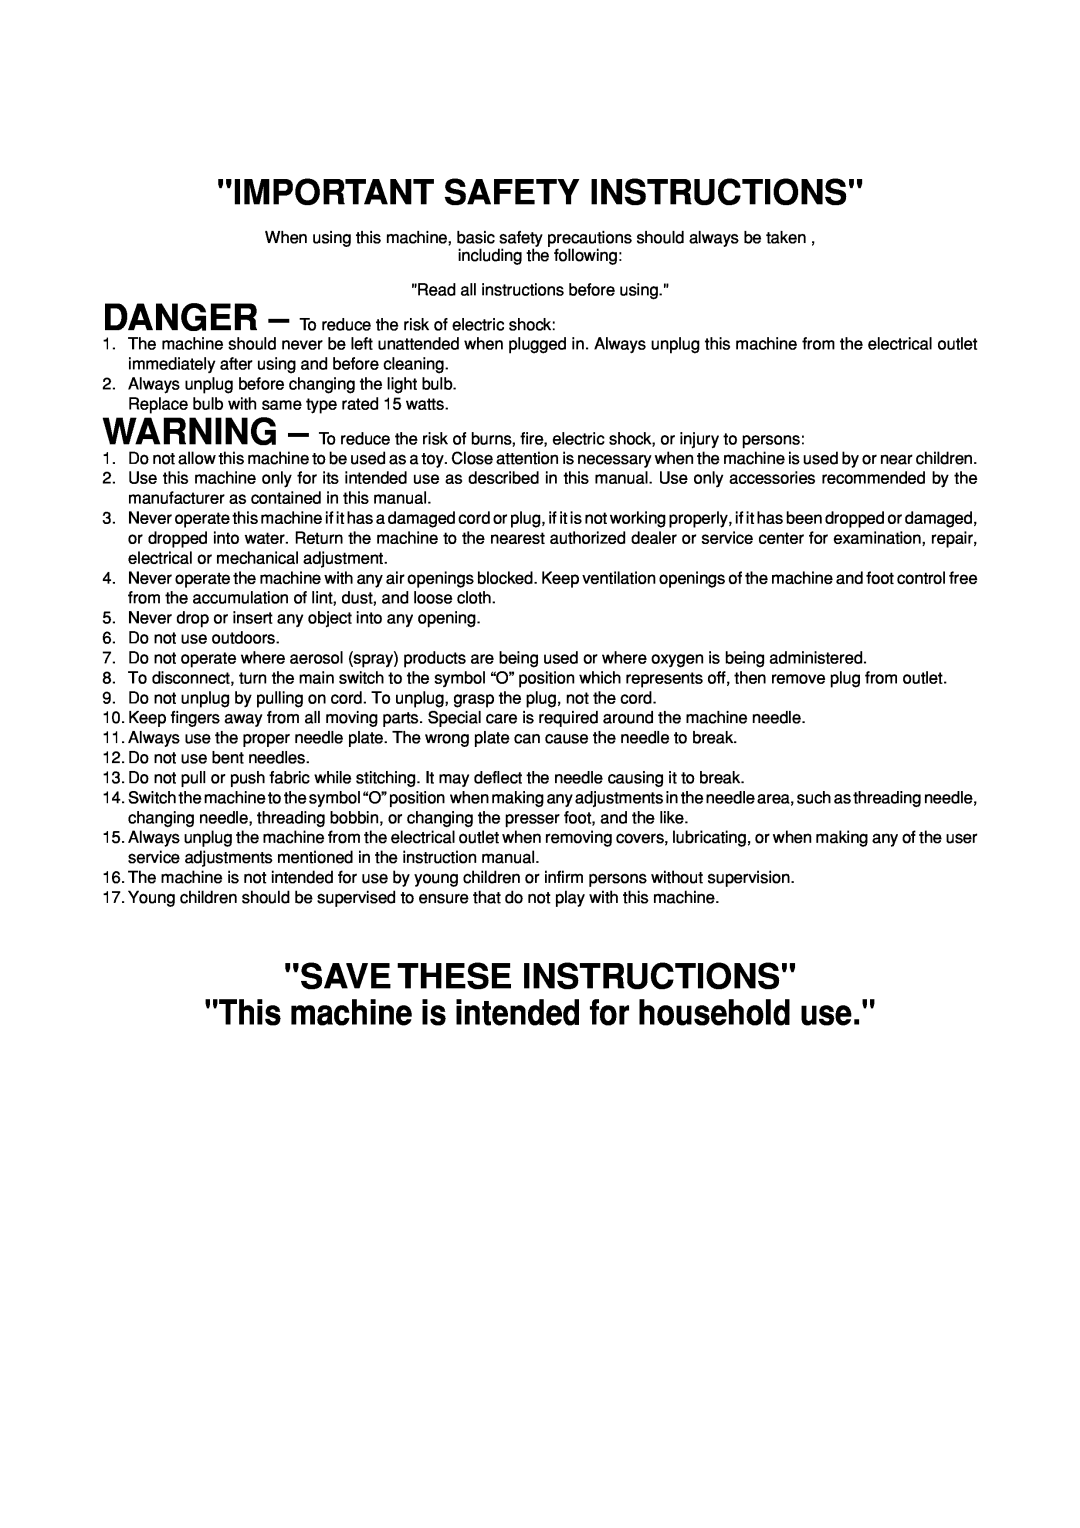 Brother XL-6060, XL-6053 Important Safety Instructions, SAVE THESE INSTRUCTIONS This machine is intended for household use 